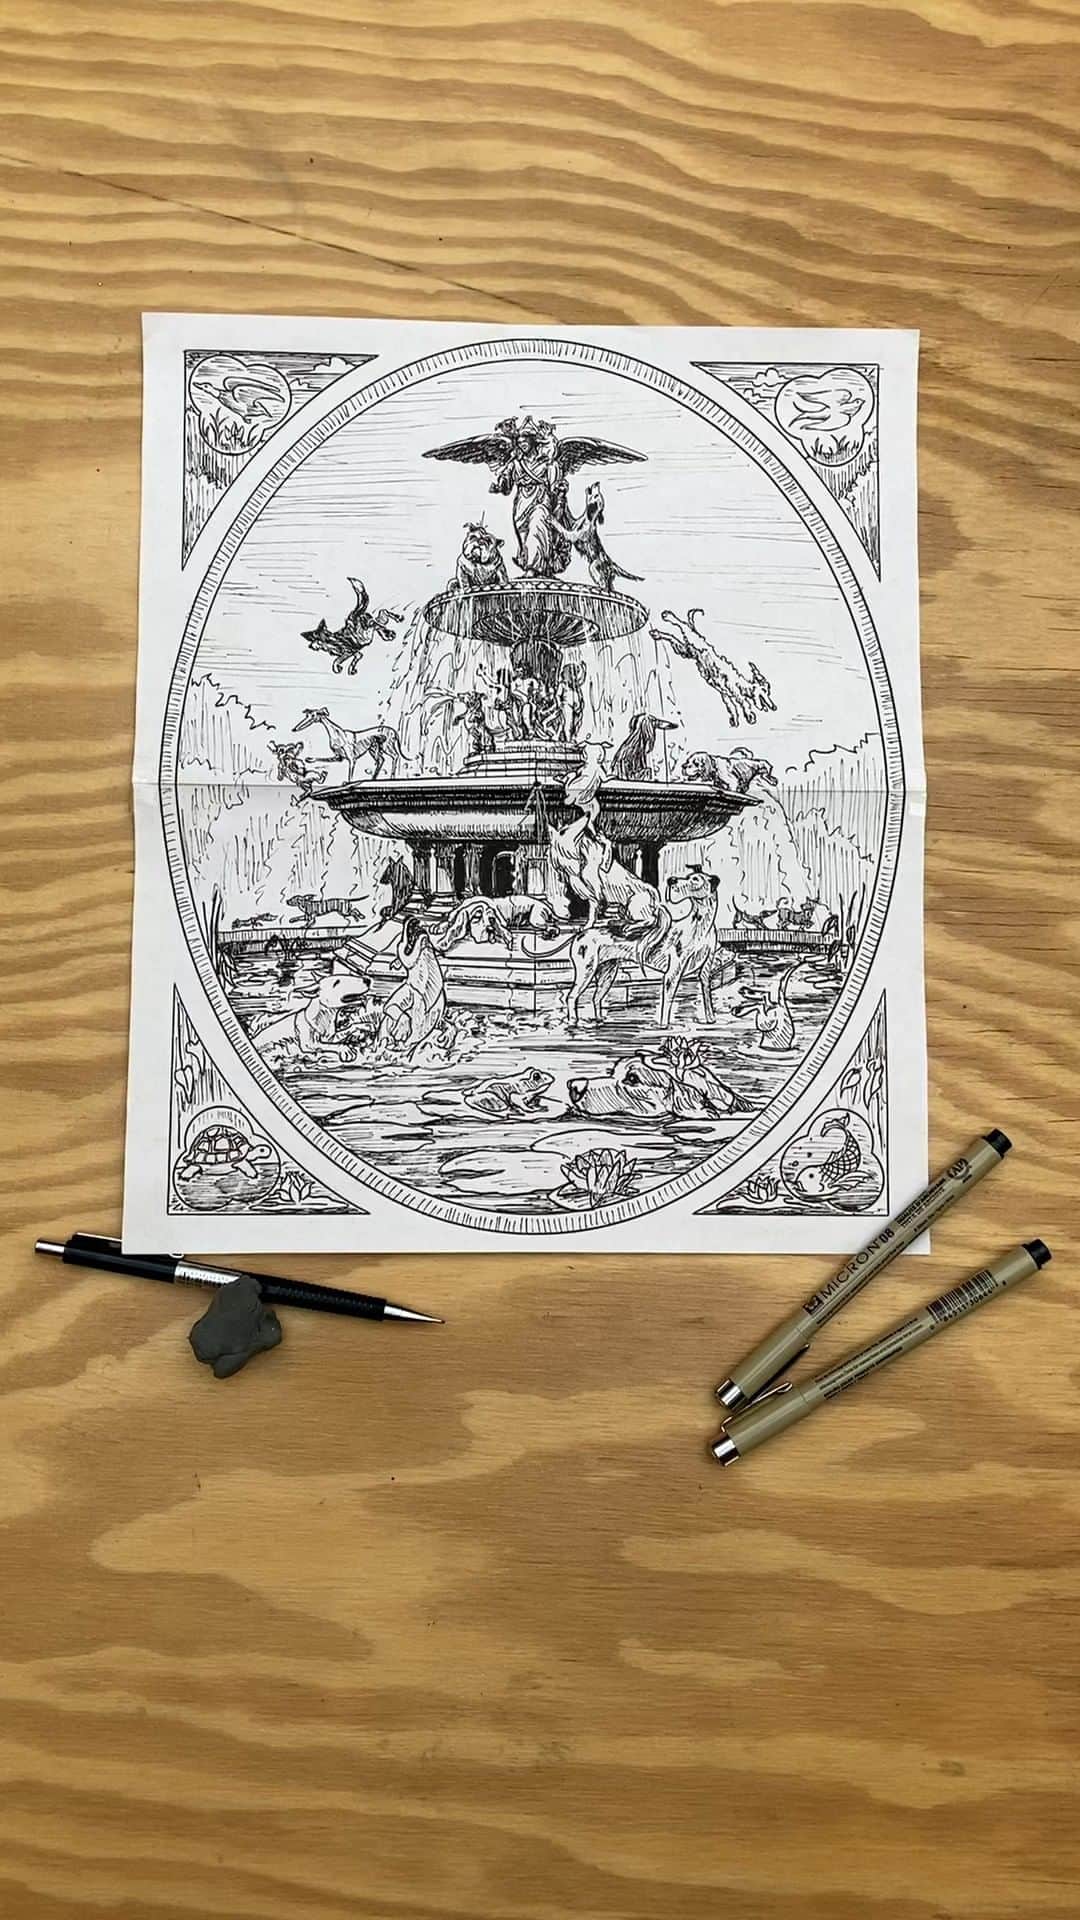 Sakura of America（サクラクレパス）のインスタグラム：「Hey everybody, @dylanjg here again. I’m a printmaker and illustrator based in Brooklyn, NY.  Here’s the initial sketch and final seven layer screen print of “Fountain Dogs” I created last summer. I came up with the idea while on a bike ride through Central Park. It was a hot summer day and there were tons of dogs playing and swimming in the iconic Bethesda Fountain. The composition and corner vignettes were inspired by all the awesome stone carvings along the staircases leading down to the fountain.   For a lot of my work, I’ll carve a larger woodblock to create the line work and then scale that down to a more manageable and frame-friendly size for a color screen print edition.」